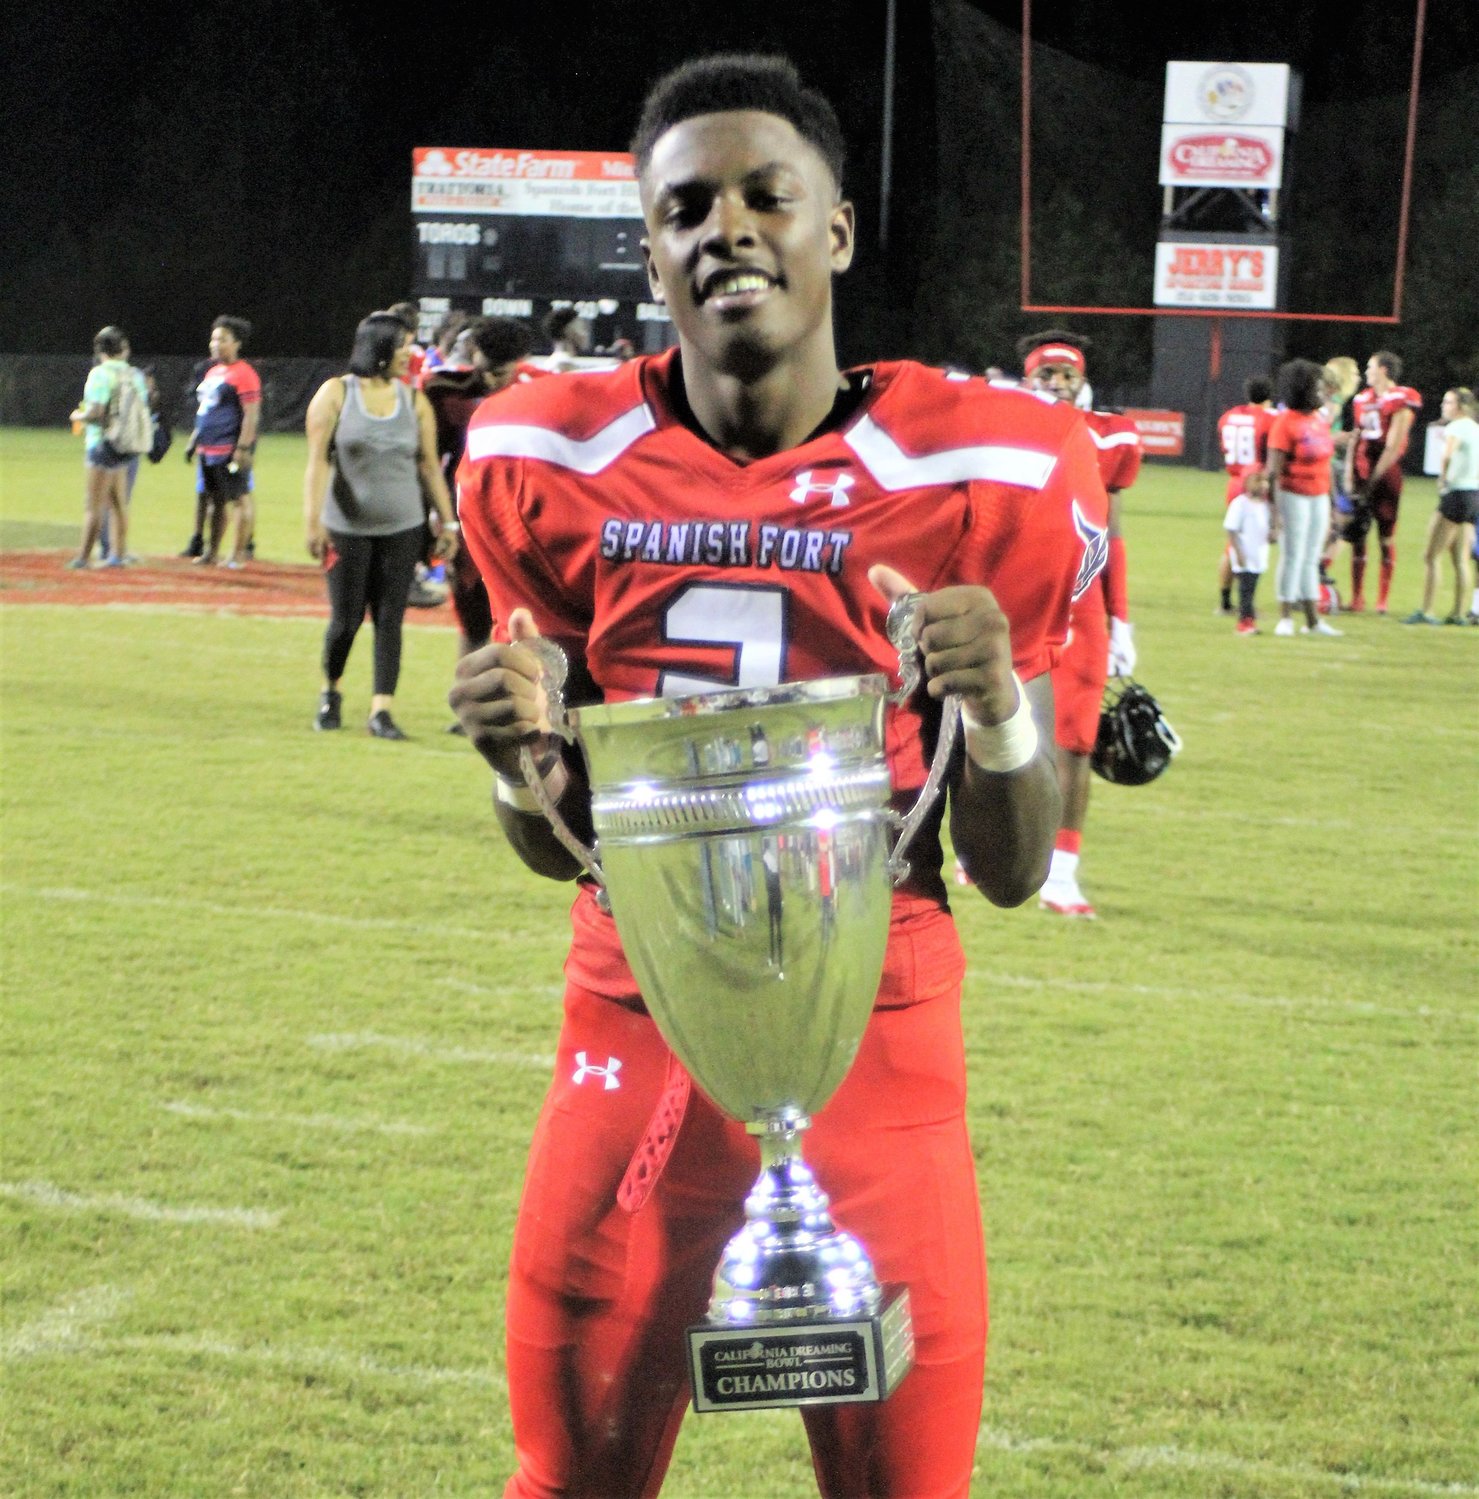 Spanish Fort corner back Desmond (DJ) James with the 2018 California Dreaming Bowl trophy. James found a new home in Auburn University for his junior season at the college ranks where he’s joined by many more former Baldwin County stars.